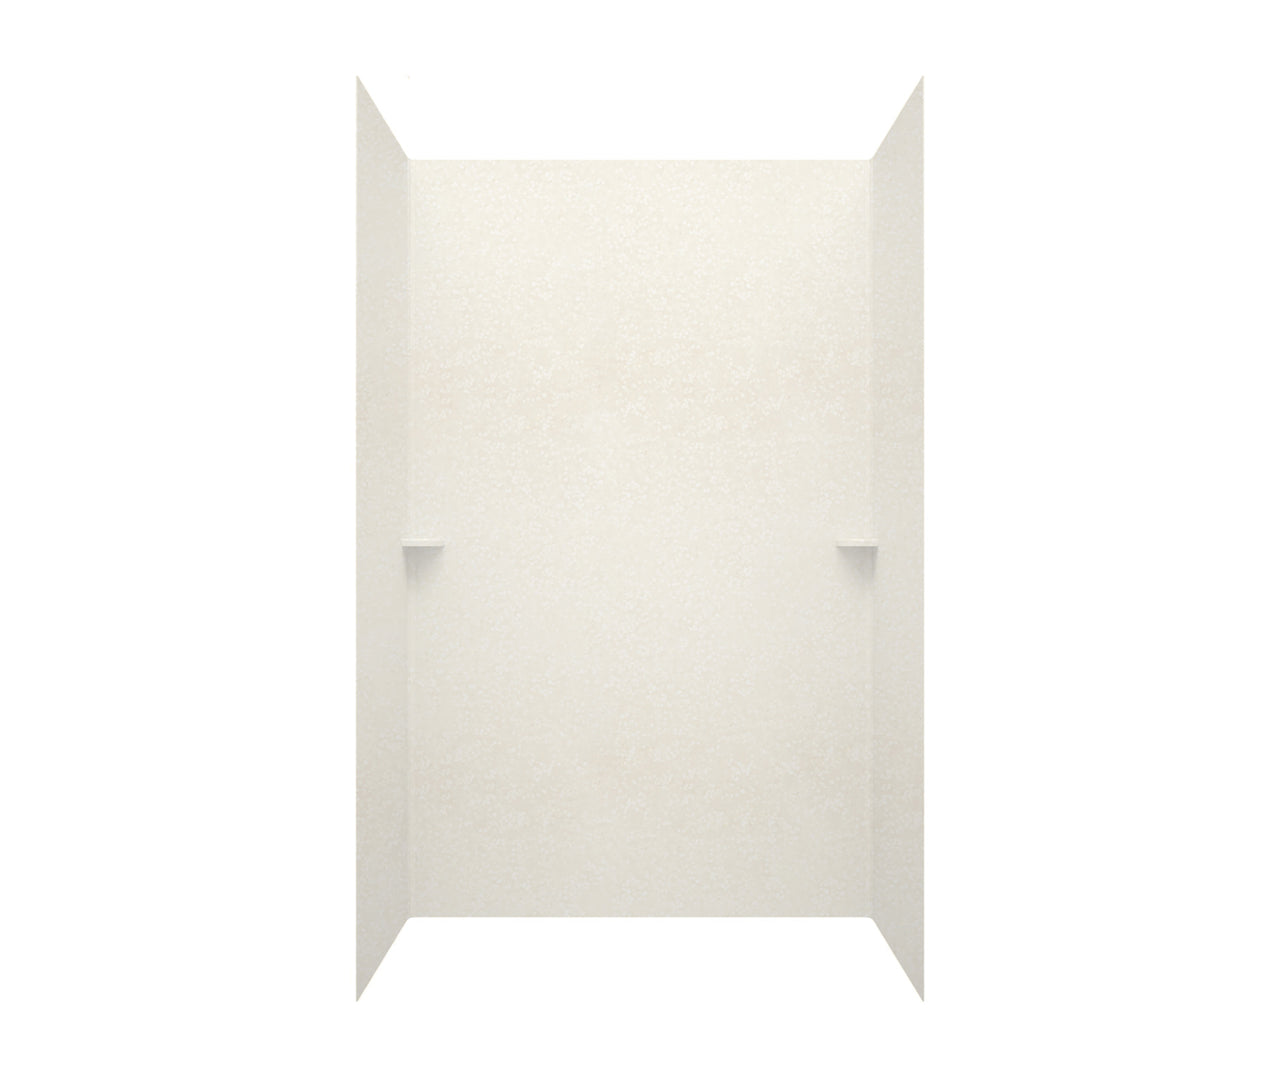 SK-363696 36 x 36 x 96 Swanstone Smooth Glue up Shower Wall Kit in Tahiti White